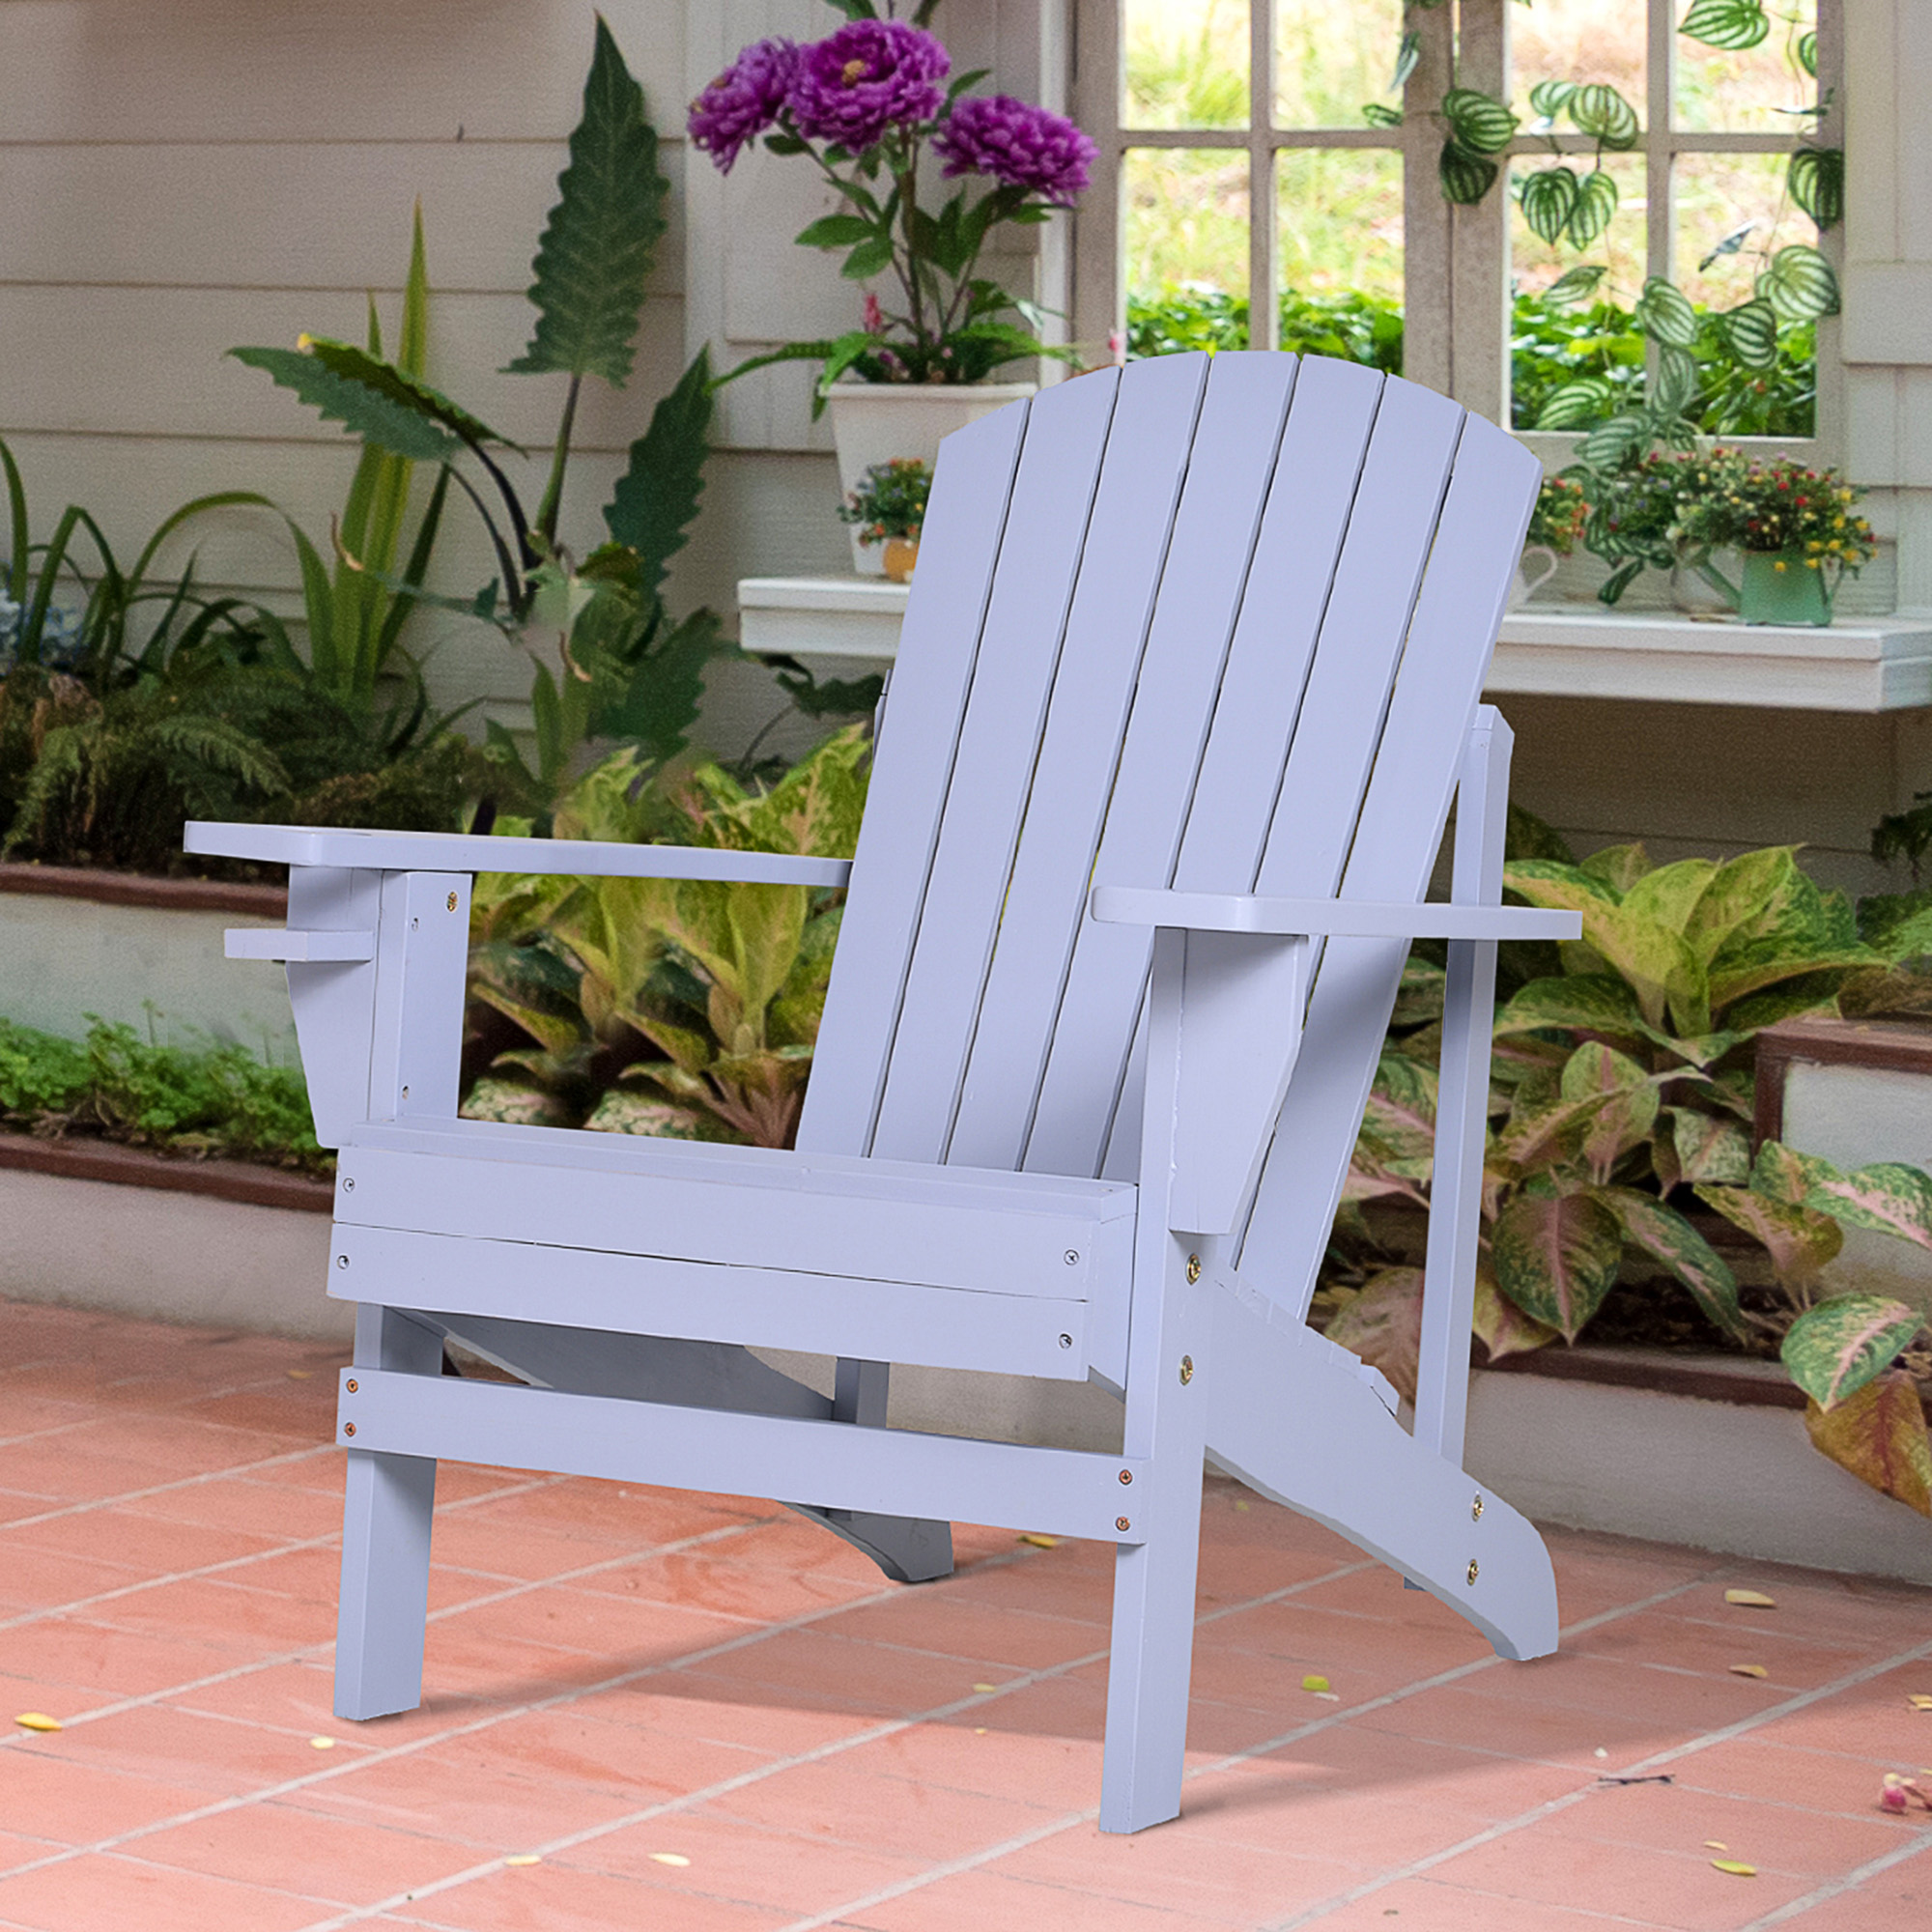 Outsunny Wooden Adirondack Chair, Outdoor Patio Lawn Chair with Cup Holder, Weather Resistant Lawn Furniture, Classic Lounge for Deck, Garden, Backyard, Fire Pit, Gray - image 5 of 9